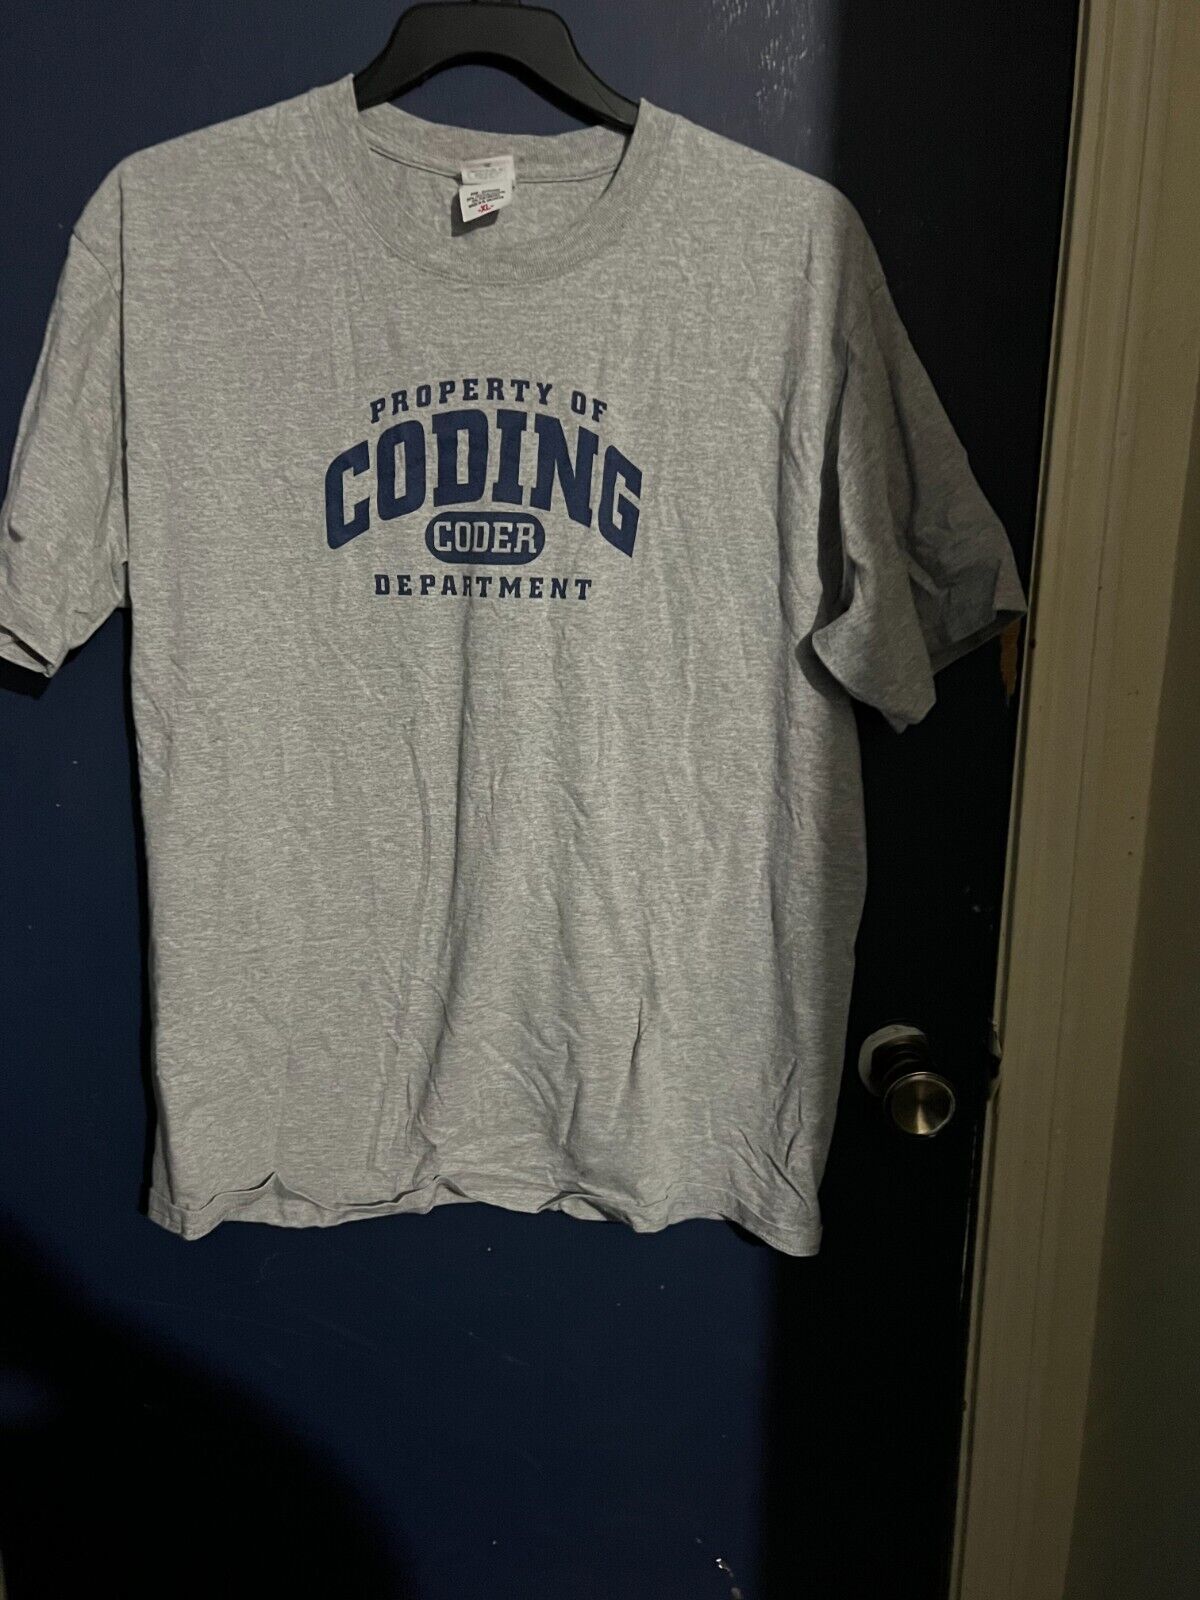 Primary image for Property of Coding Department Tee Size XL